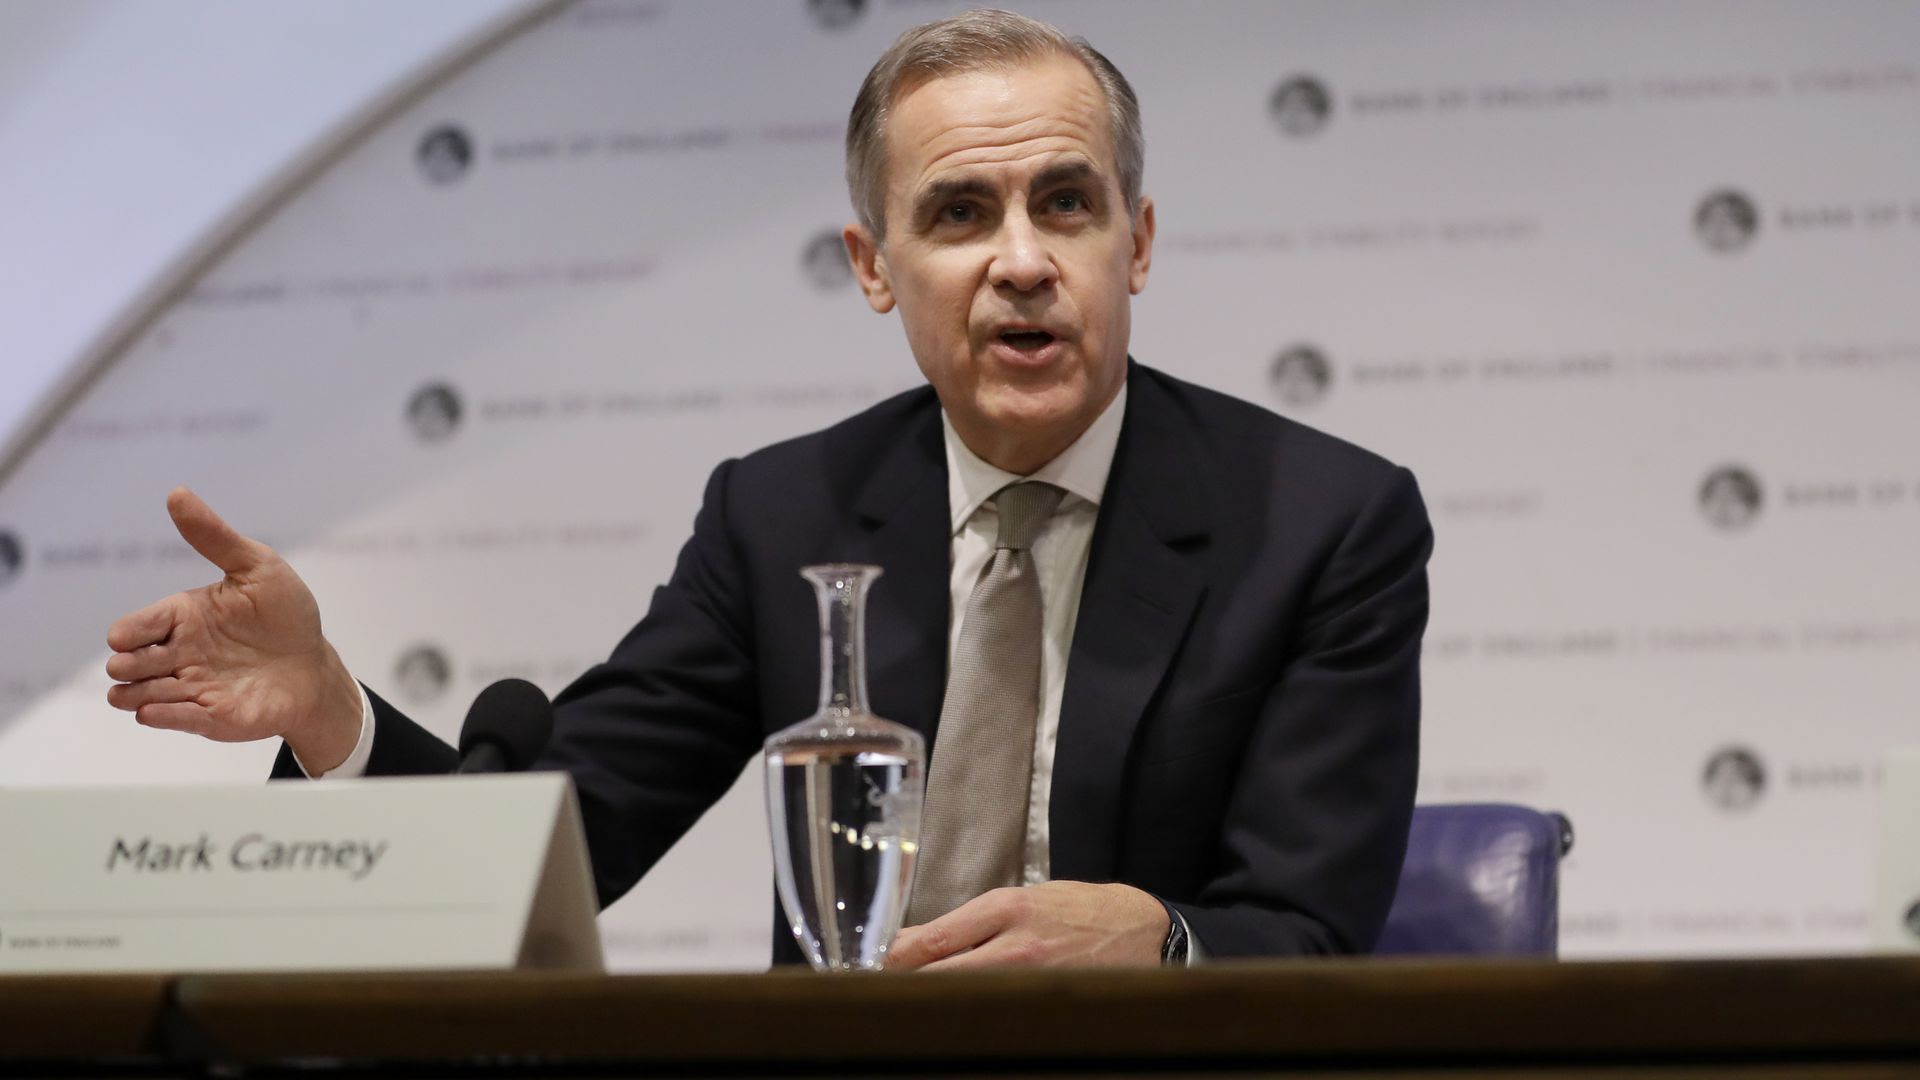 Bank of England's outgoing Mark Carney and his climate change legacy - Axios